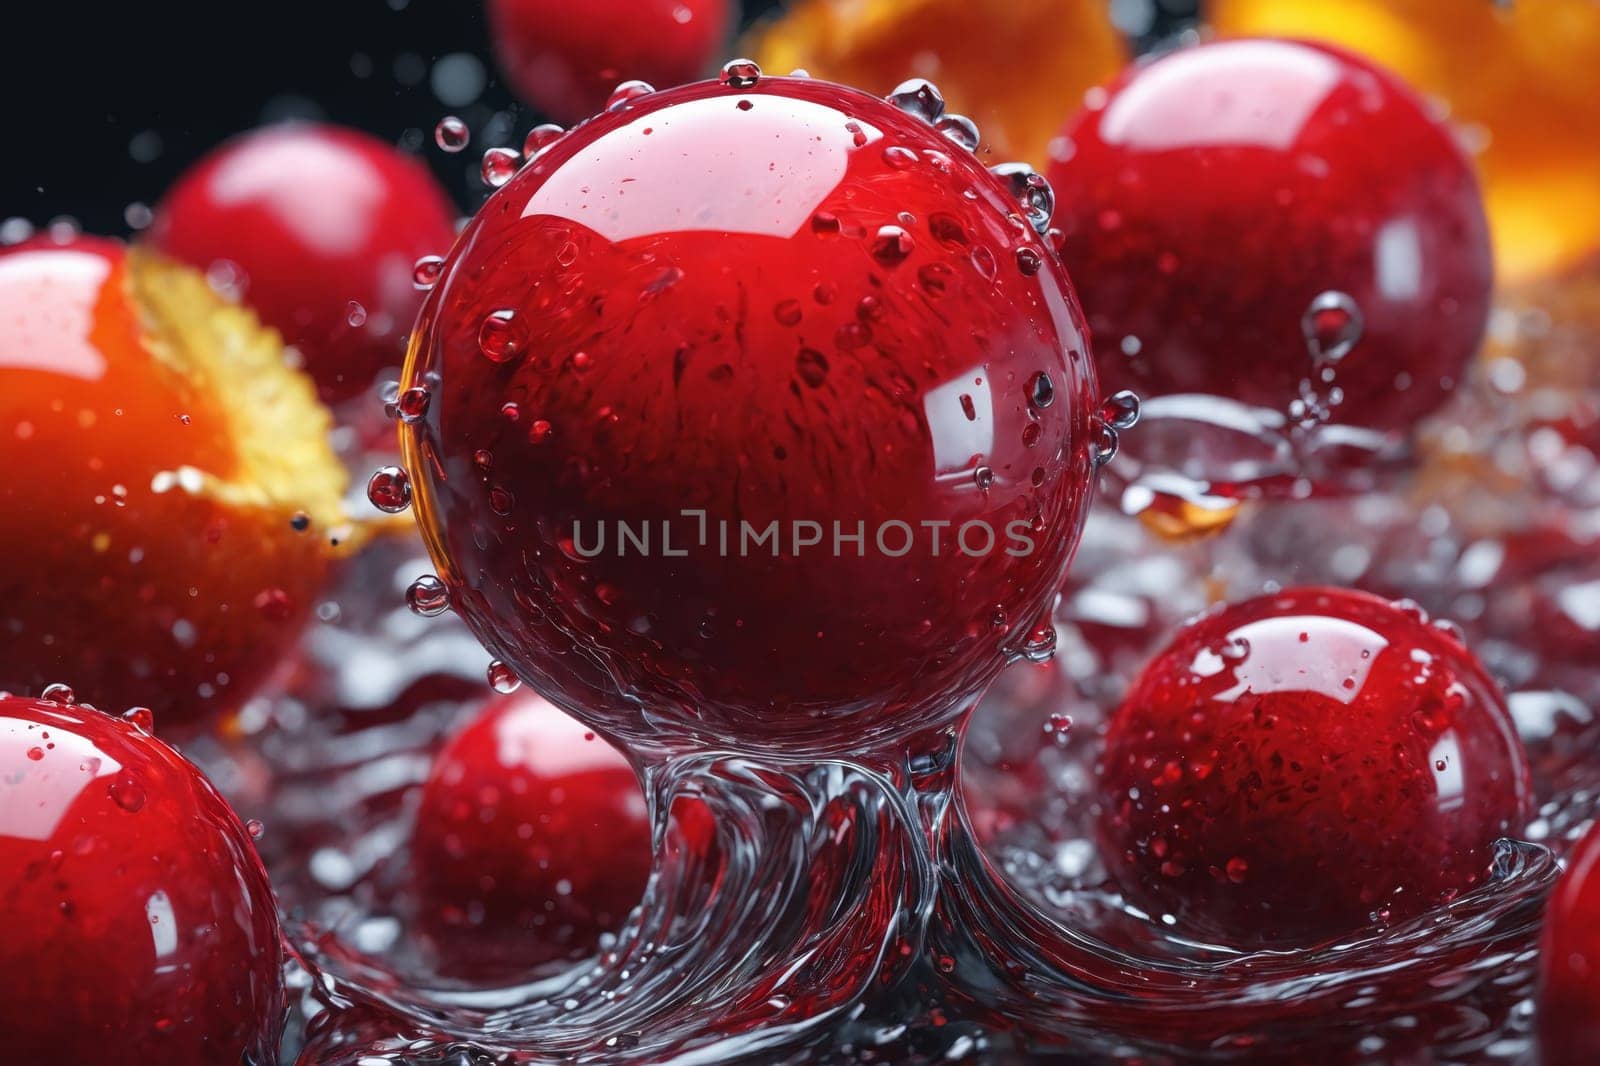 Close-up of red balls covered in water droplets, set against a warm yellow background.